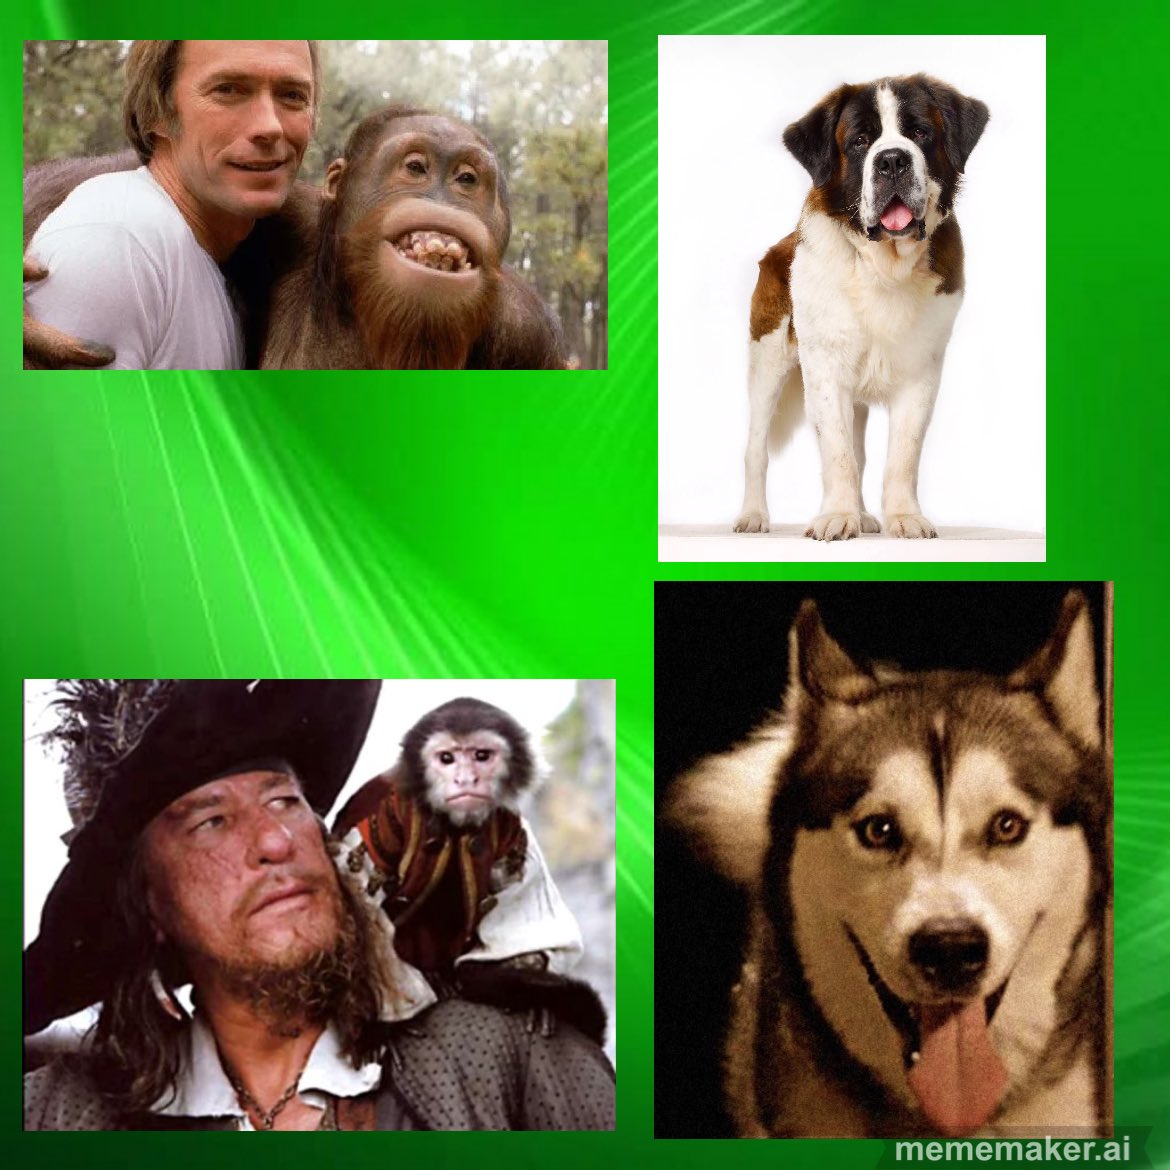 Choose one of these famous movie pets!#bethoven #dunstonchecksin #lostboys #Piratesofthecarribean #moviemayhem
#moviemadness
#chooseyourchampion 
#chooseone
#pickone #famouspets